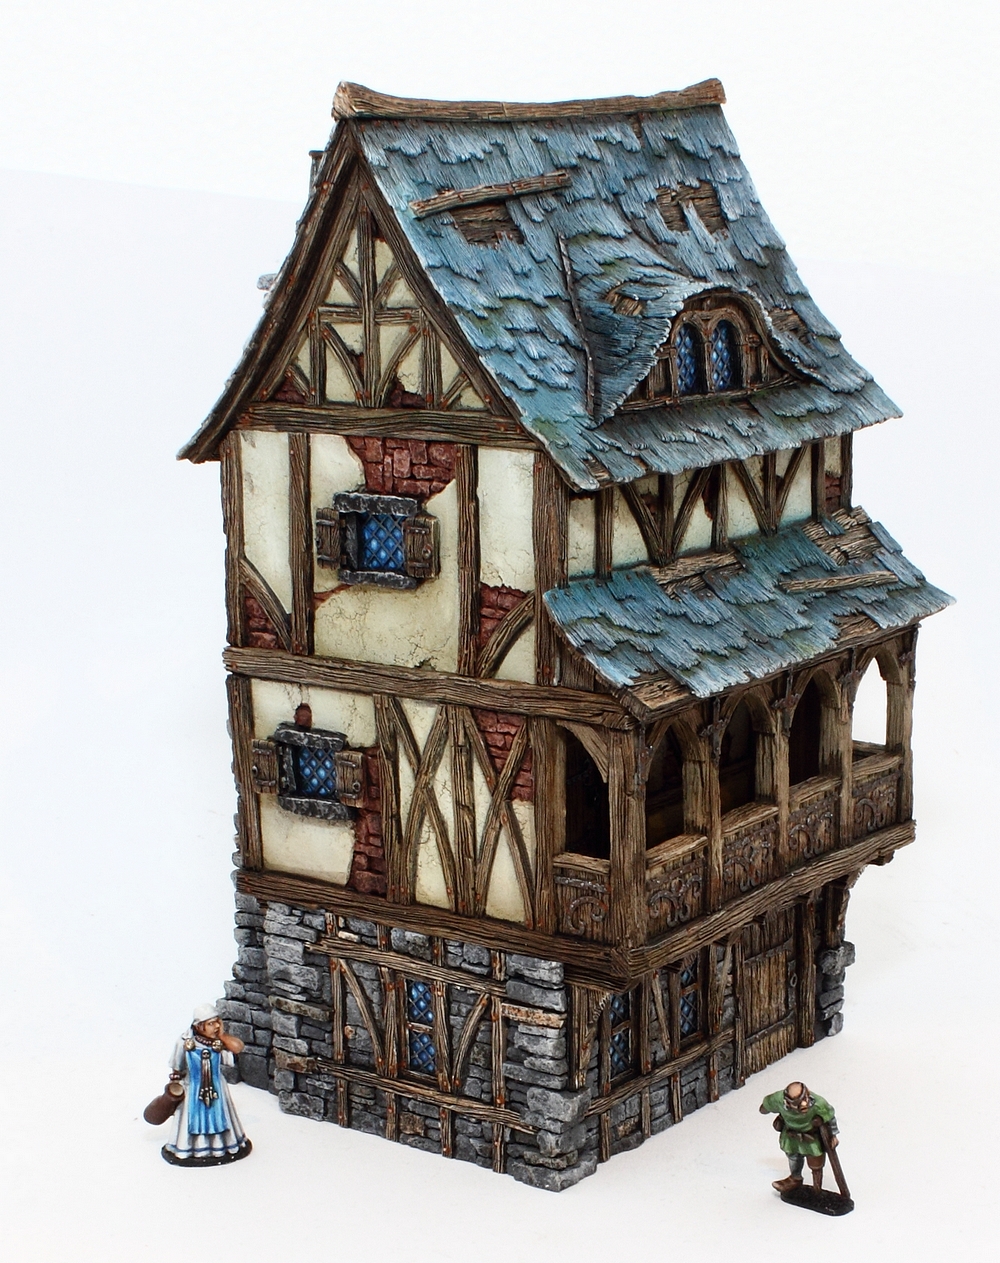 Review: Tabletop World Townhouse II - Tale of Painters